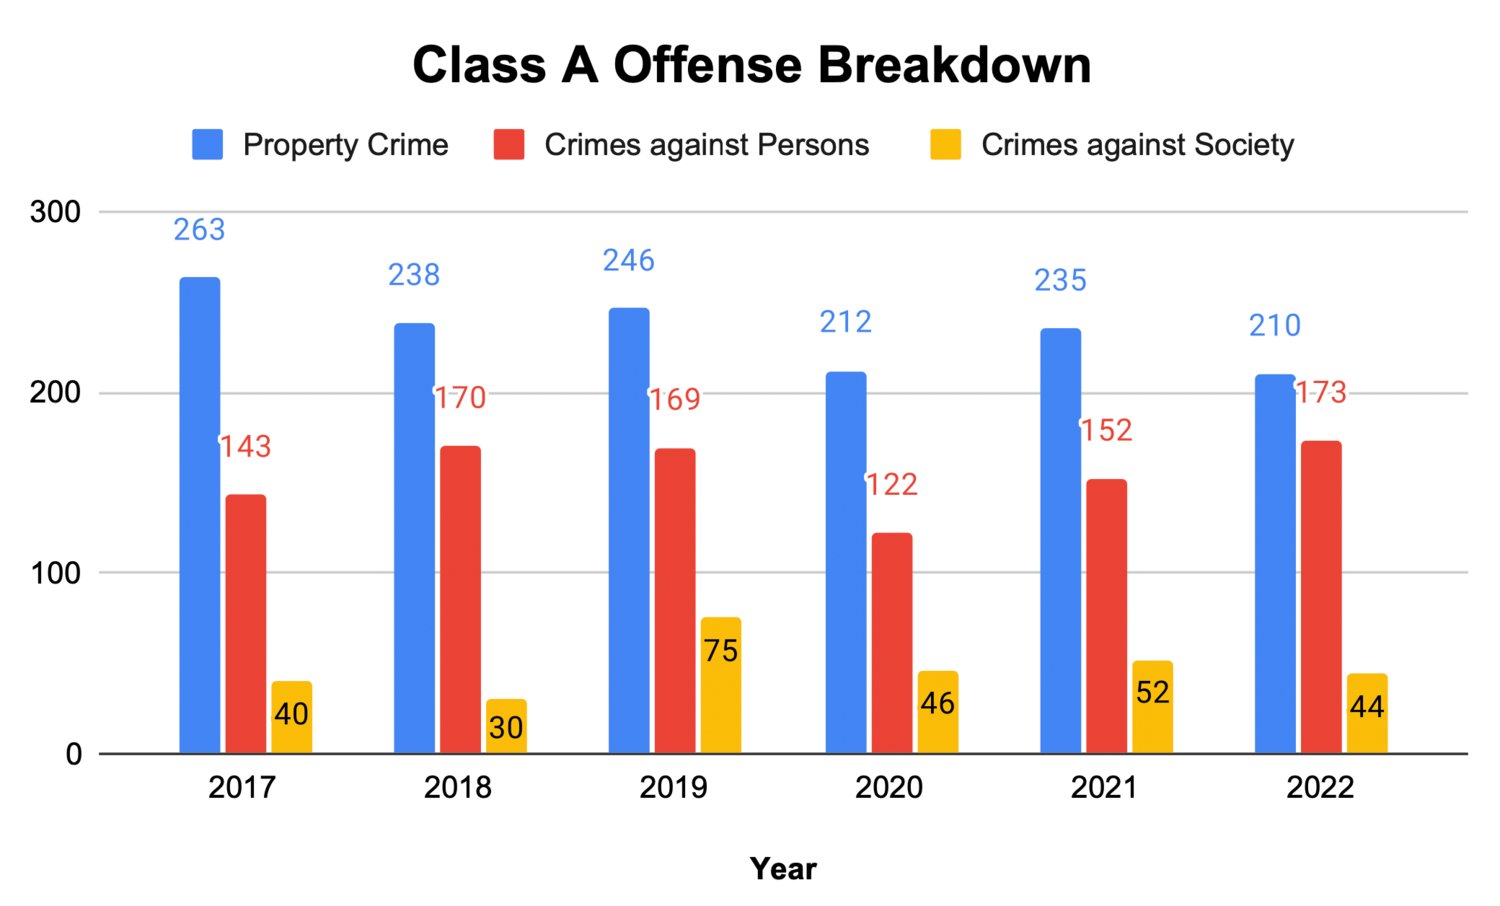 Total arrests in Warren, broken down by type of offense, show that crime has stayed relatively flat or gone down since 2017, although crimes against persons has been trending upwards since 2020.